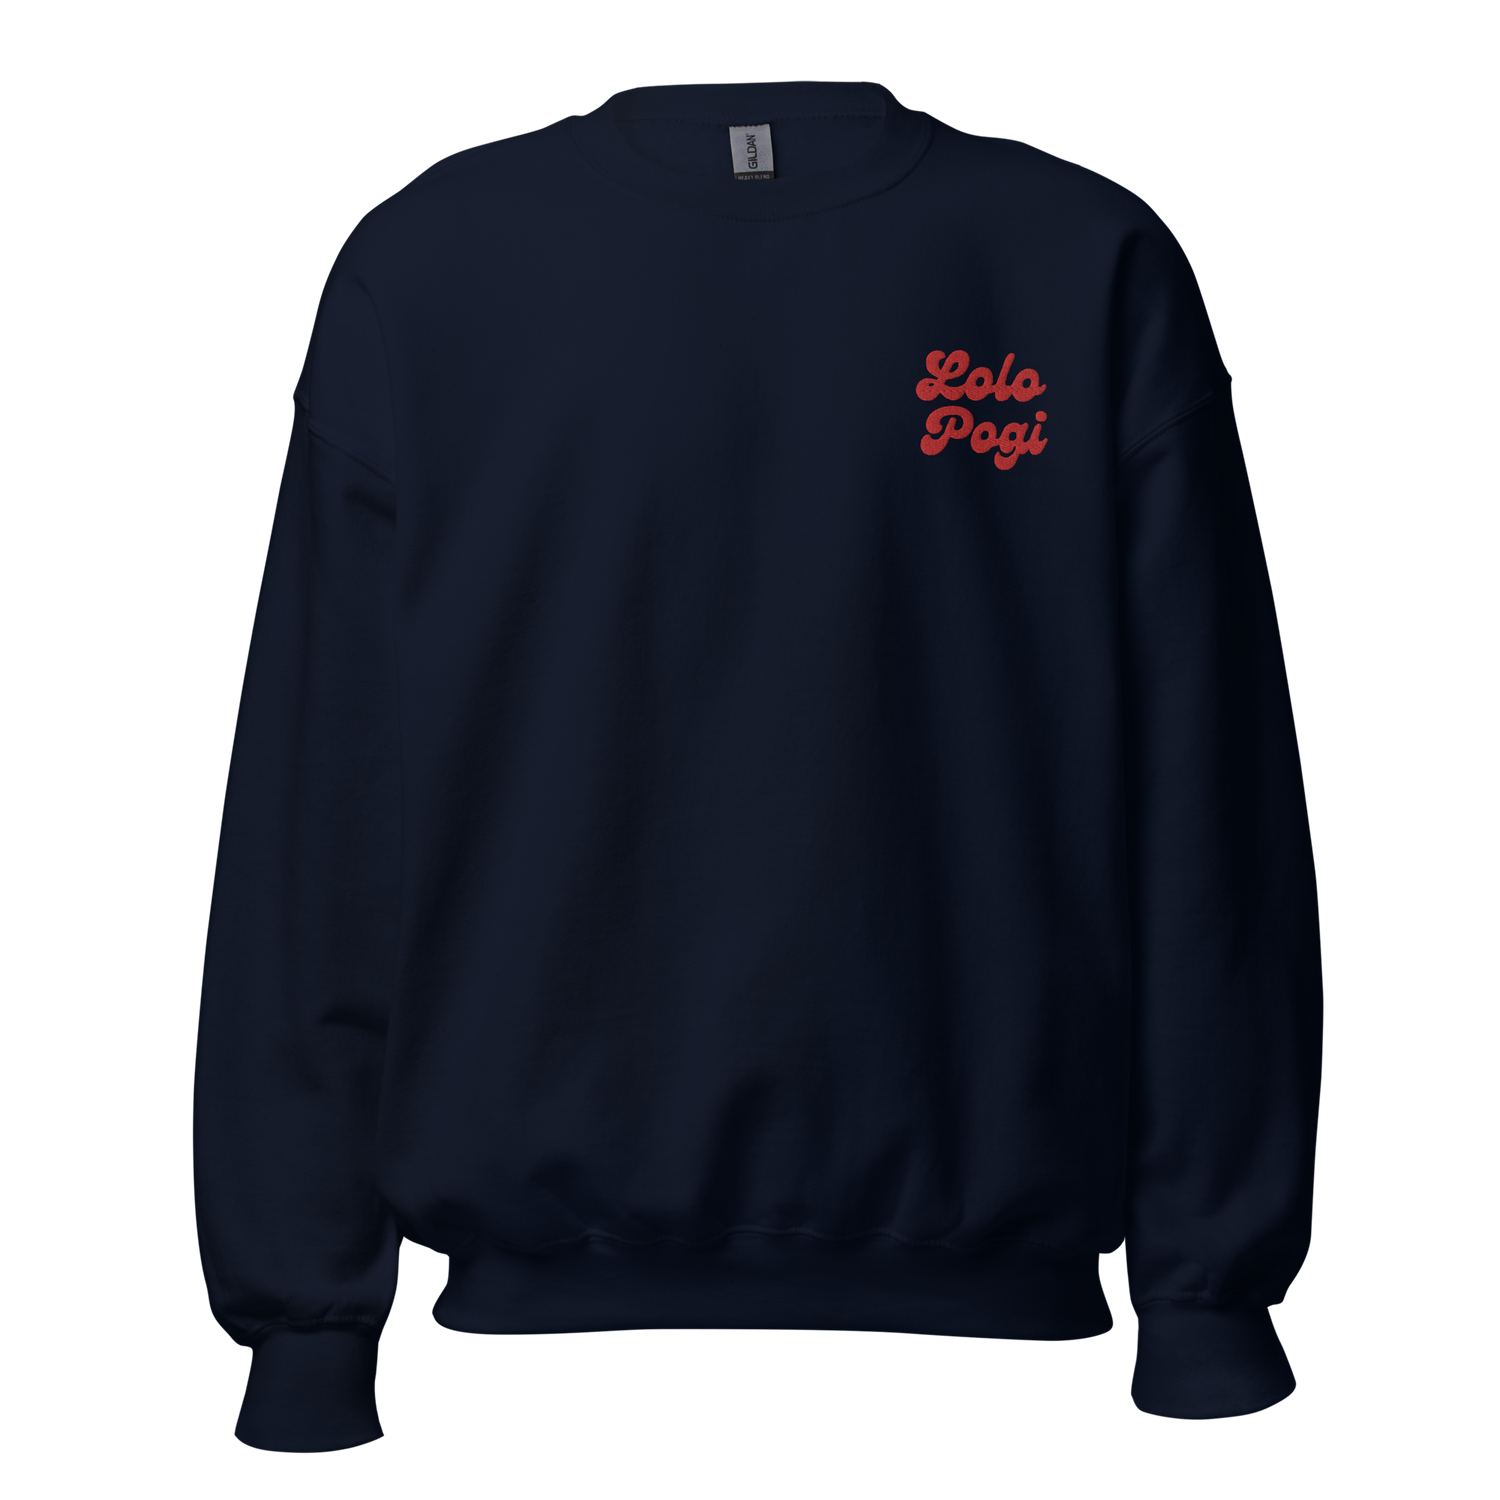 Filipino Sweatshirt Crew Neck Lolo Pogi Grandfather Embroidered Father's Day Gift in color variant Navy